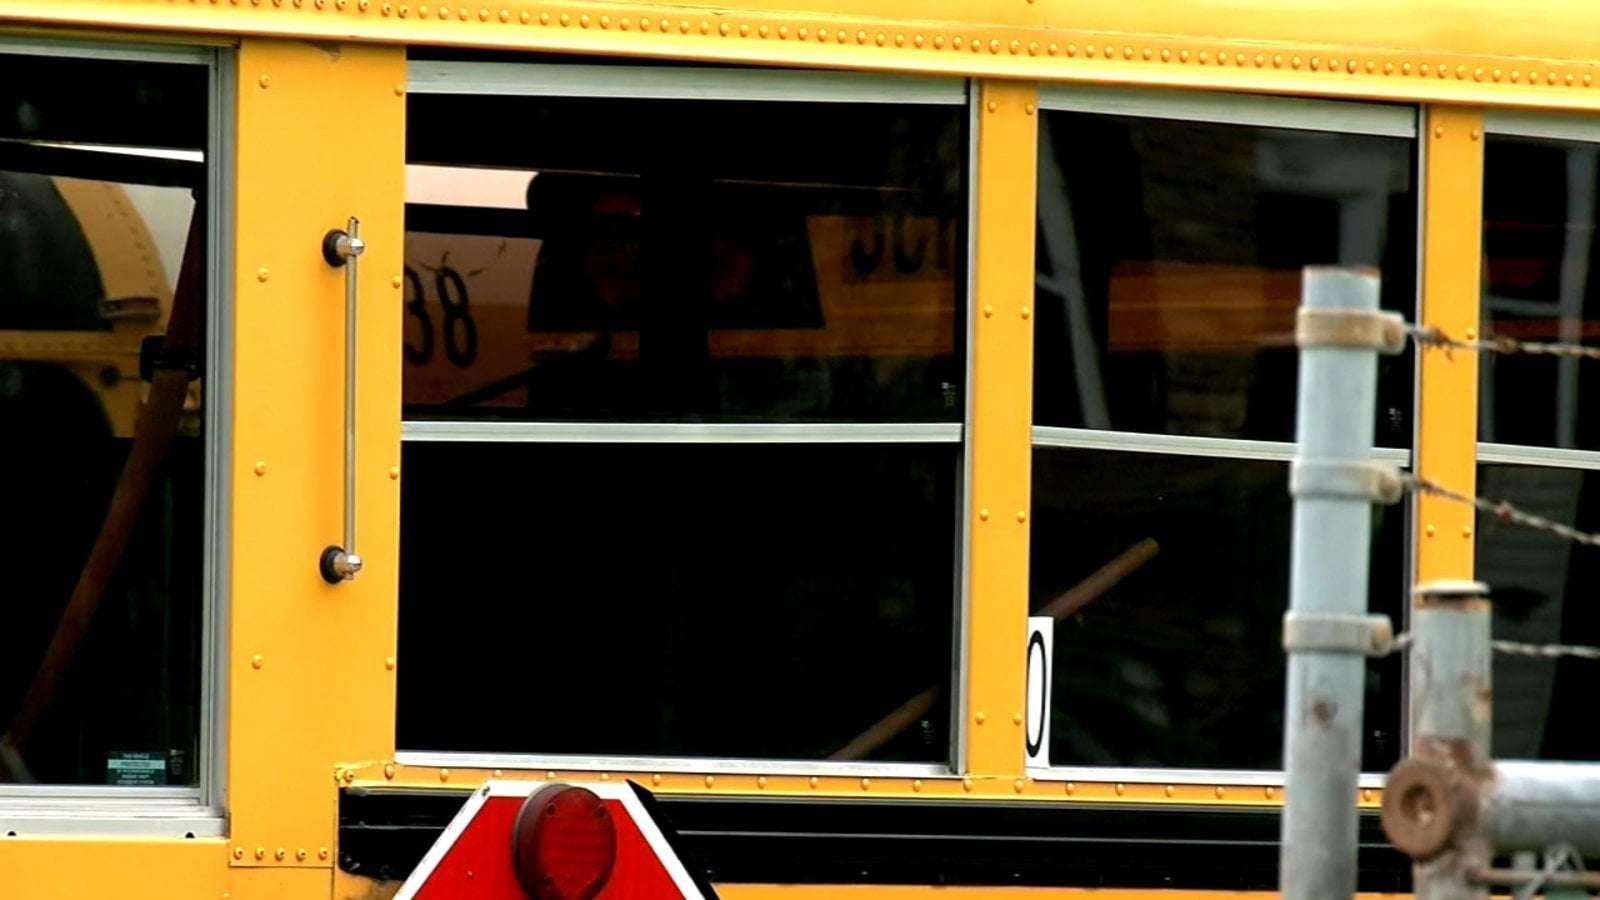 image for 3 masked teens jump on school bus, shoot at 14-year-old boy's head, beat him after gun misfires